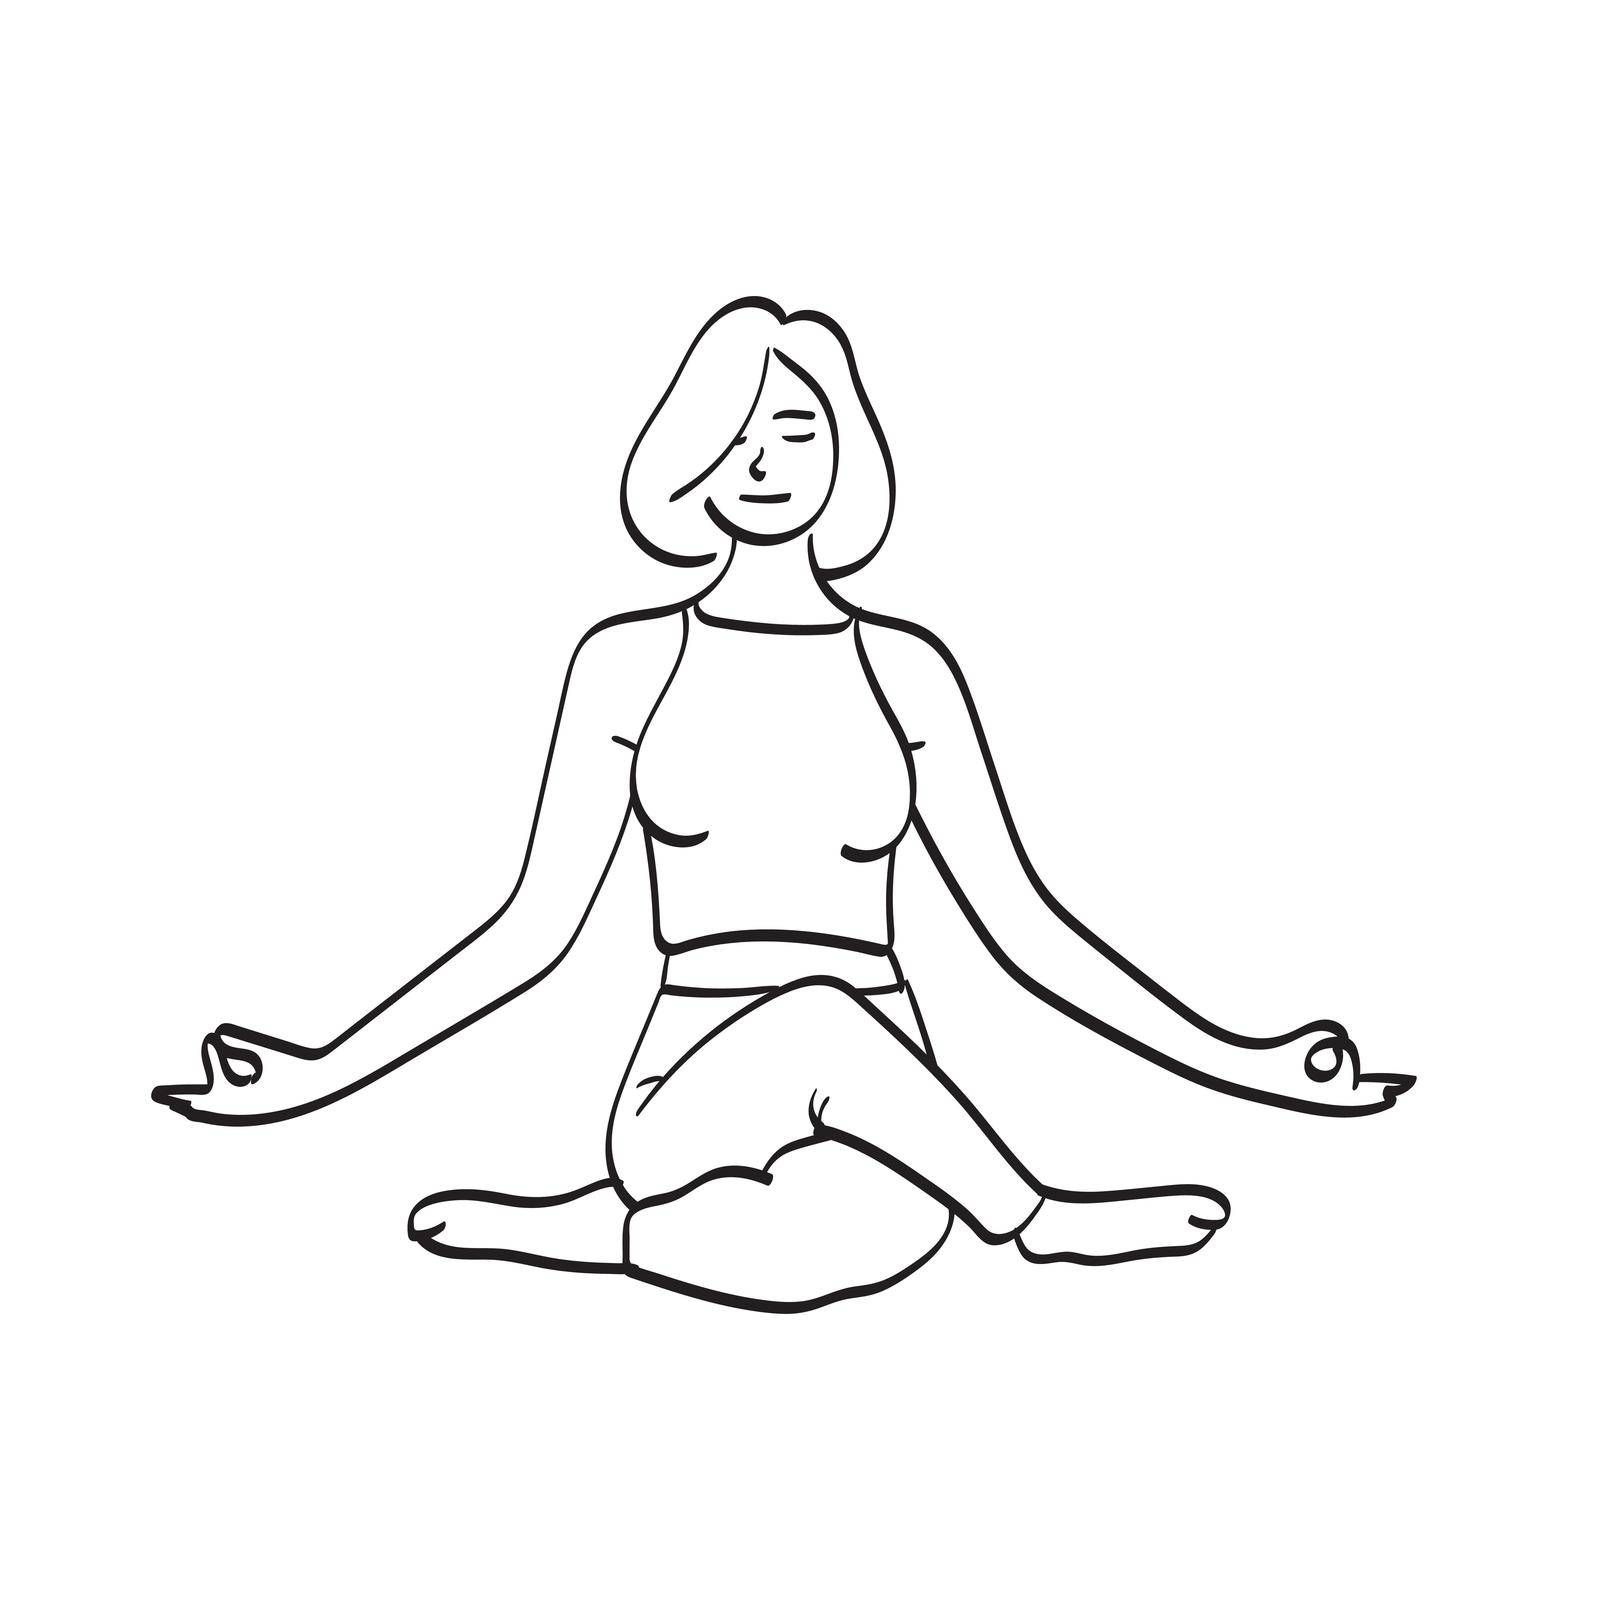 woman practices yoga and meditates in the lotus position illustration vector hand drawn isolated on white background line art.